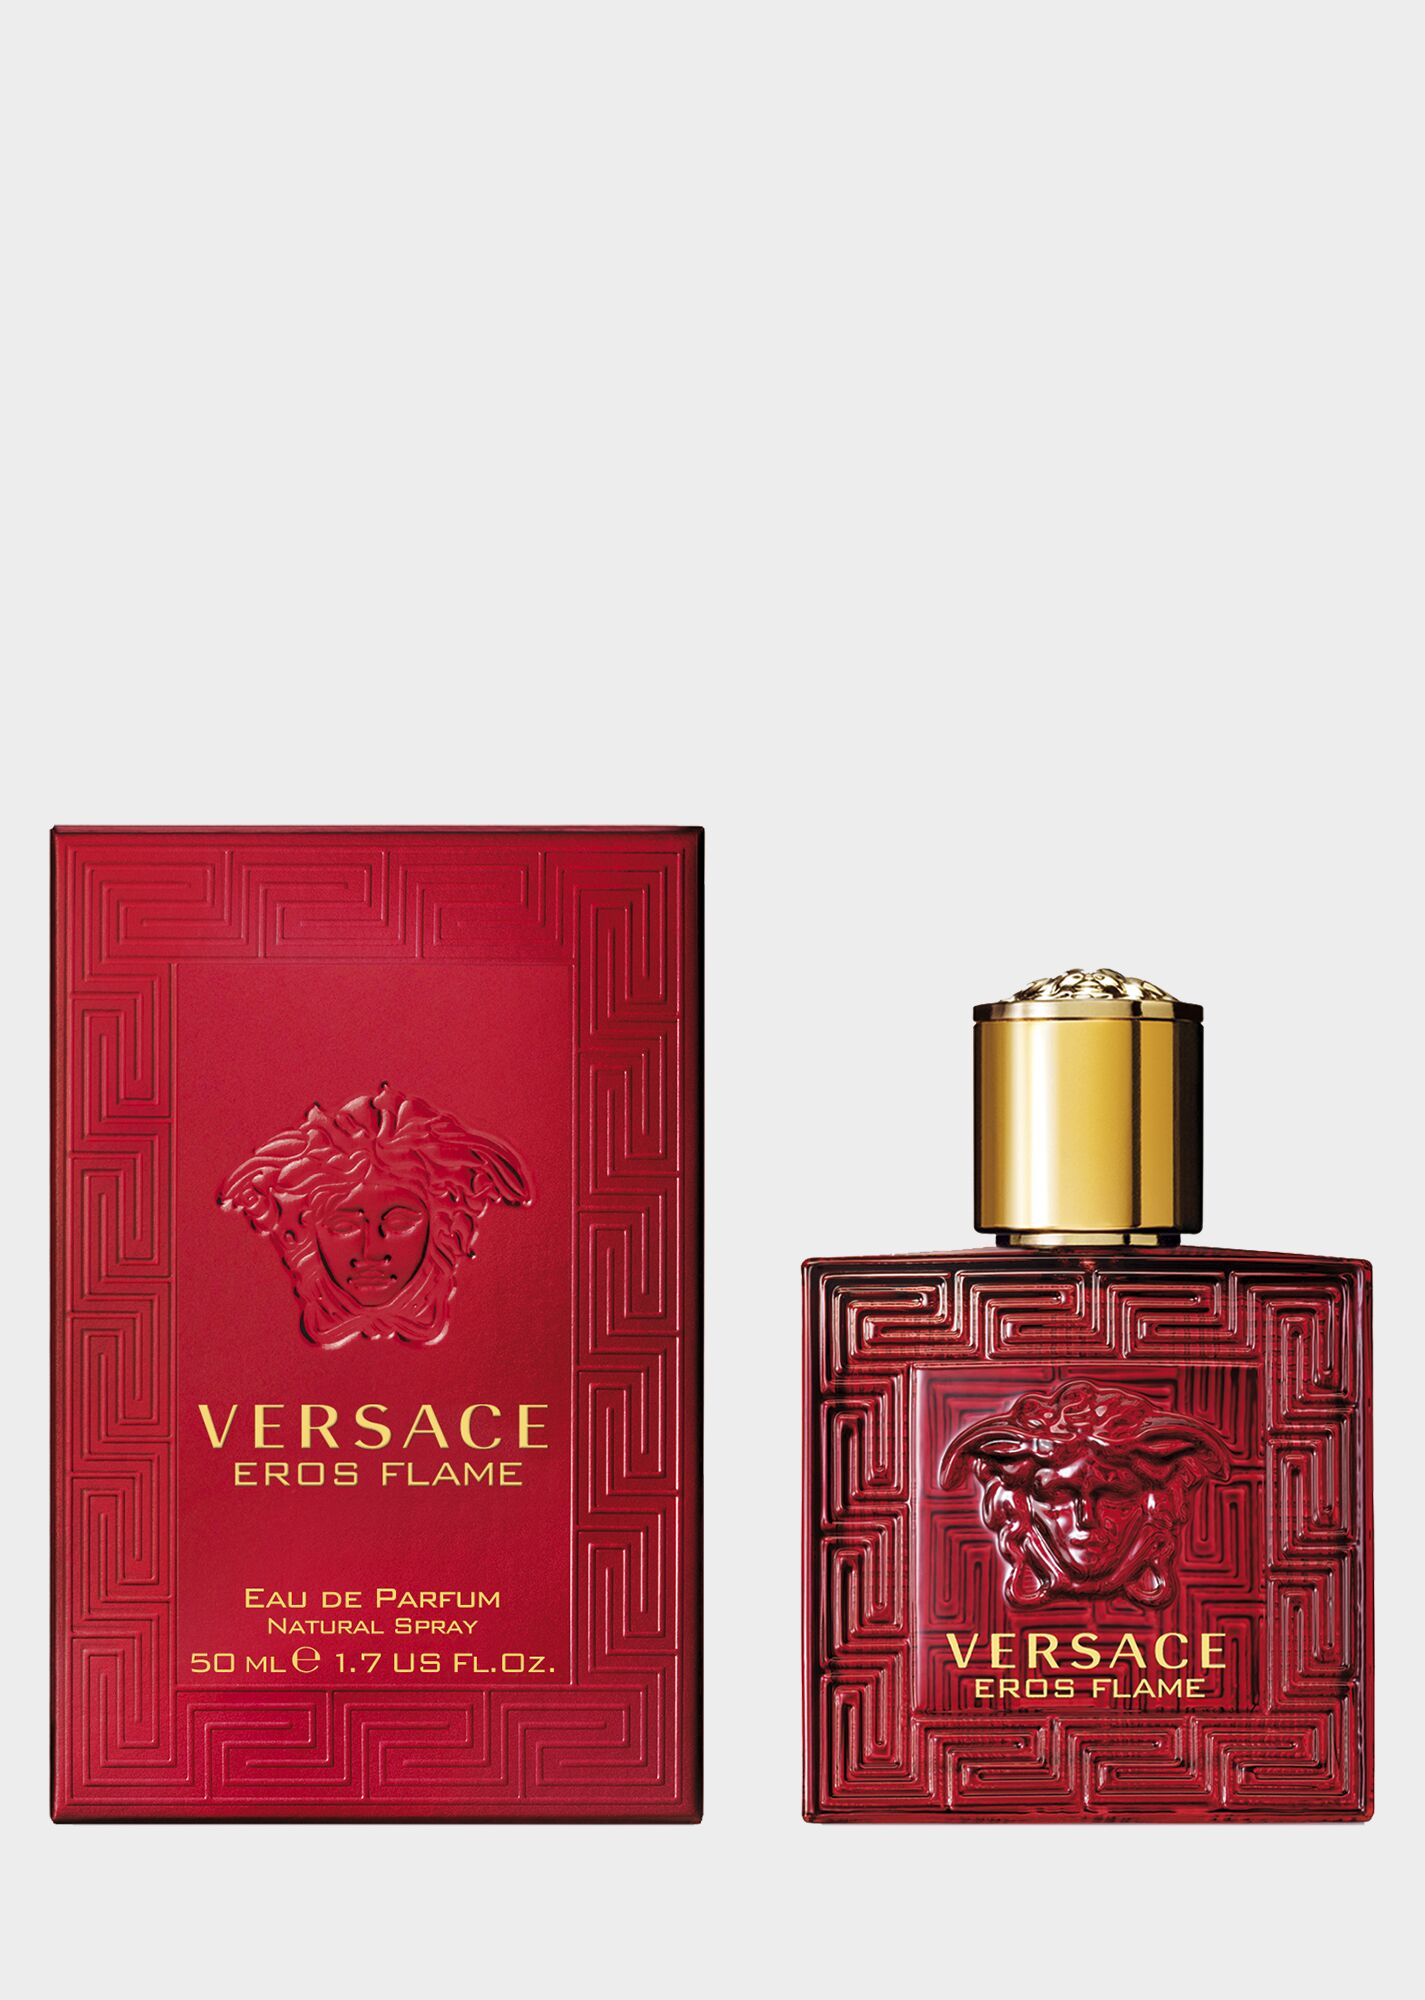 Versace Eros Flame Fragrance Review 